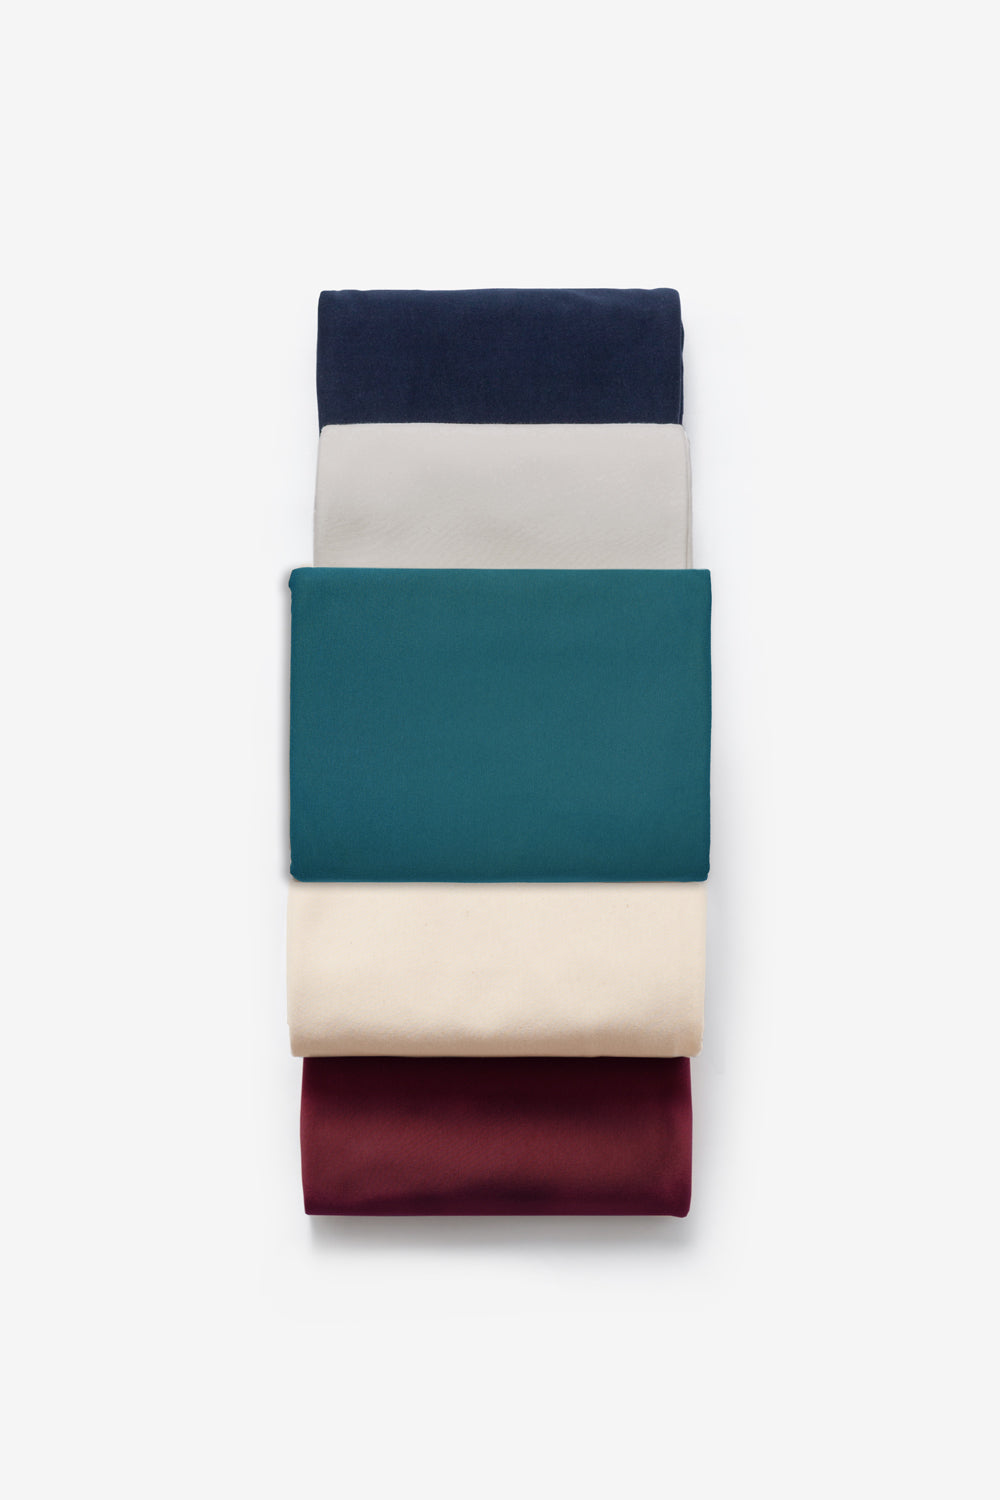 Studio Bundle with Teal, Sand, Beige, Navy, and Plum fabric.